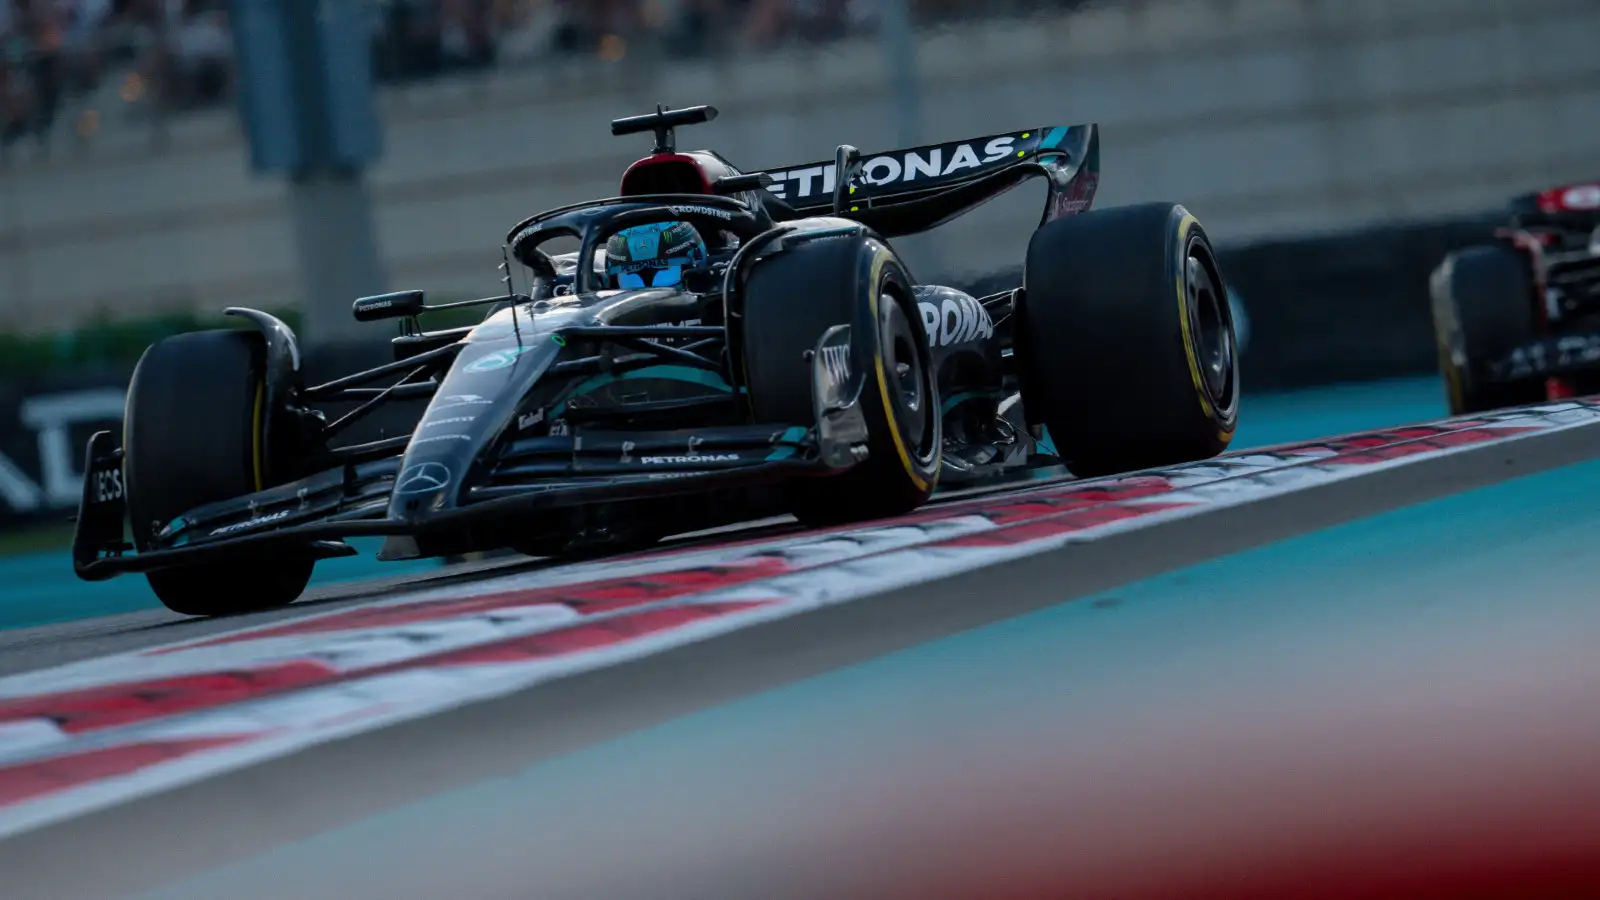 George Russell races his Mercedes in the Abu Dhabi Grand Prix.